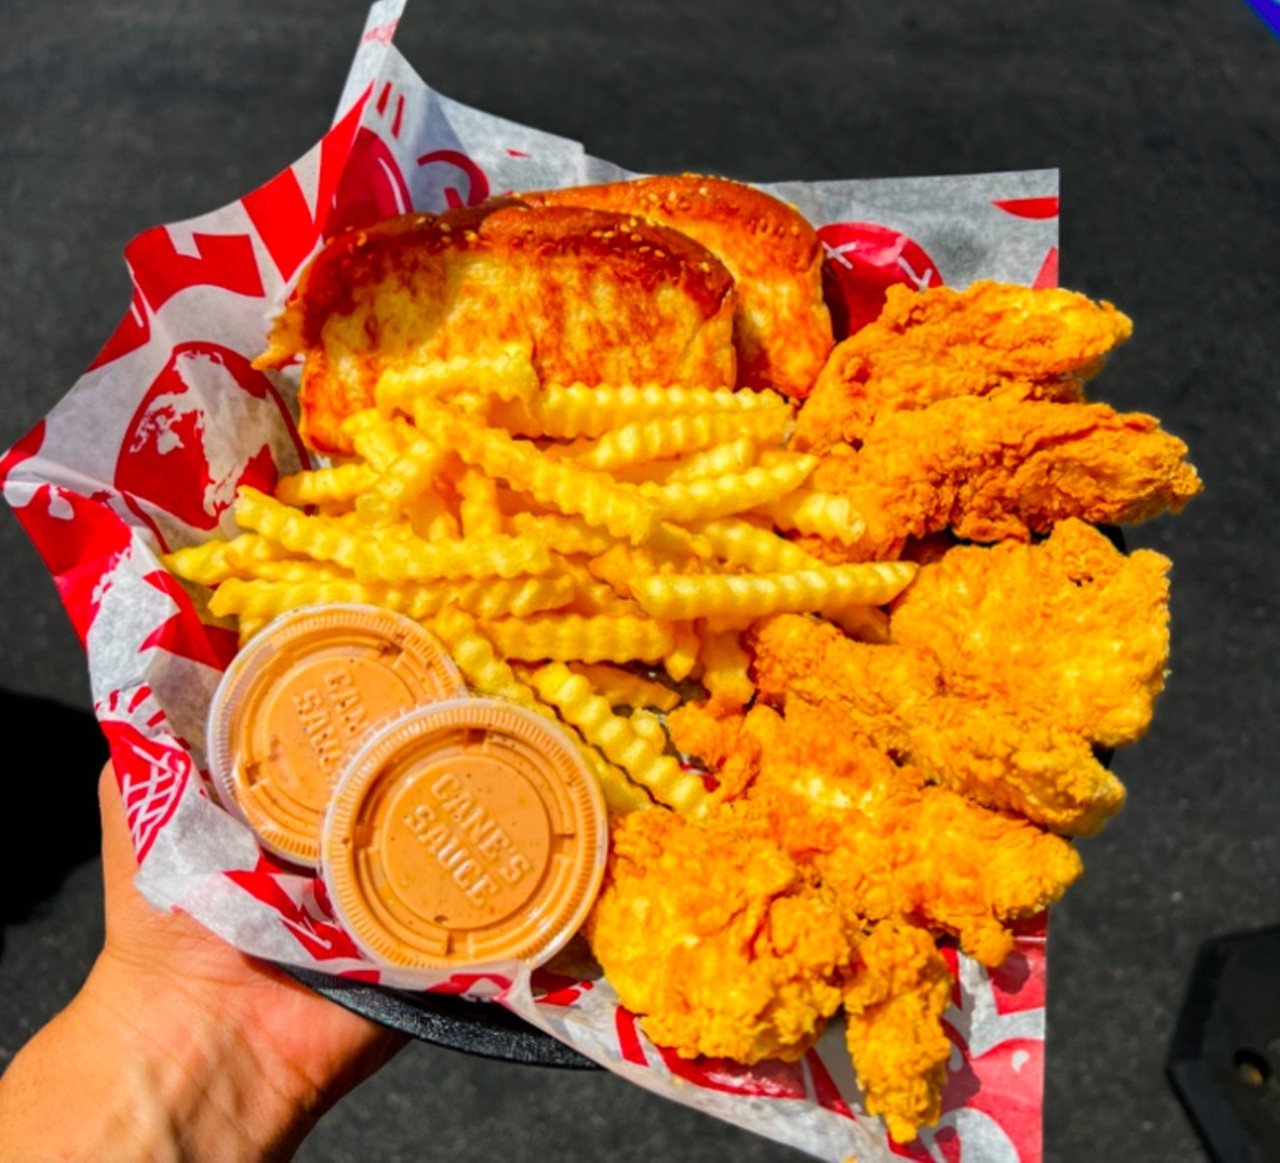 Raising Cane’s
7105 Palm Parkway
The Louisiana-style chicken finger purveyor earlier this fall announced it will soon open its first three Central Florida locations. Raising Cane’s opened its first Orlando location Nov. 7 not far from Walt Disney World. Two more chicken spots are on their way, the company says.